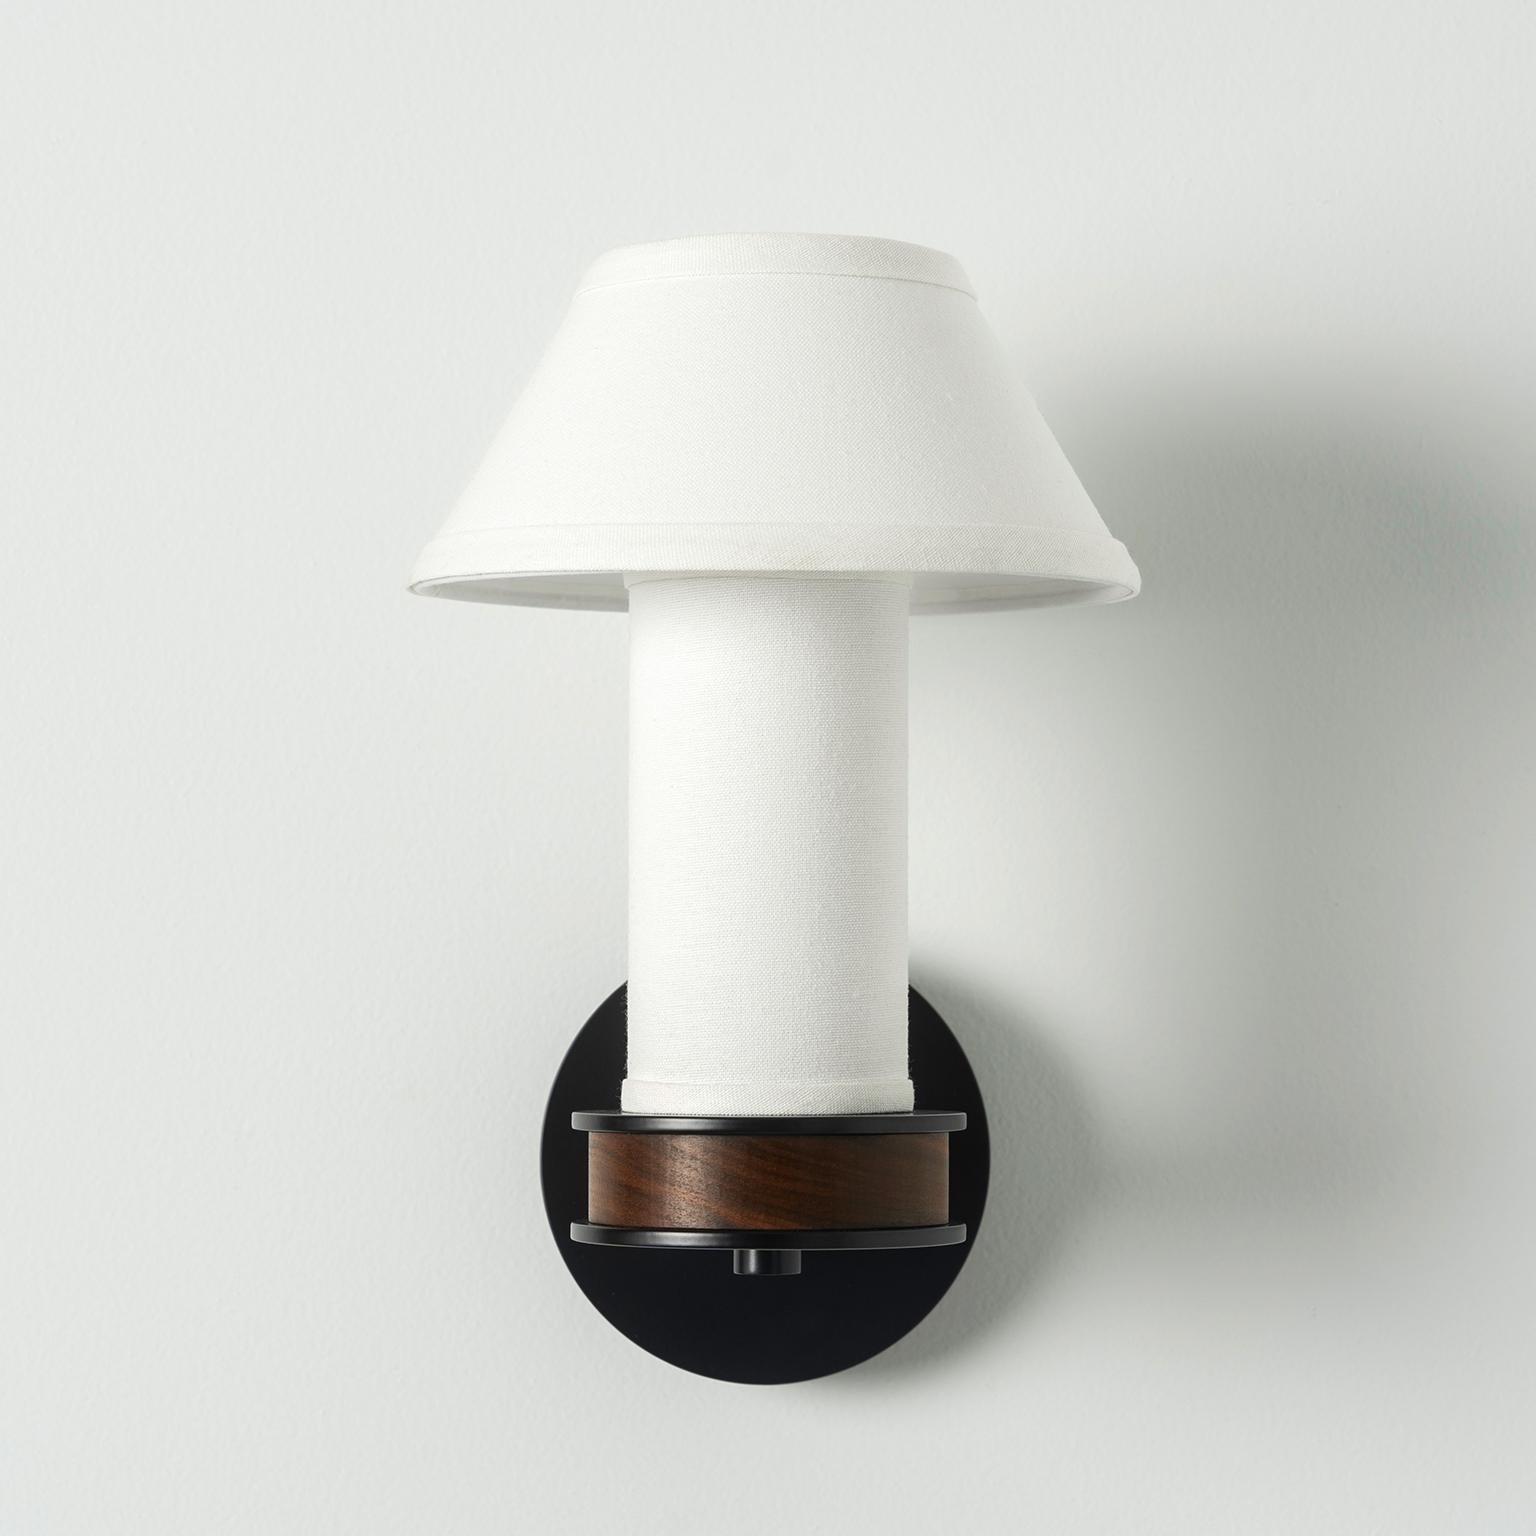 Hand-Crafted Pillaret Rise Sconce by Studio DUNN For Sale